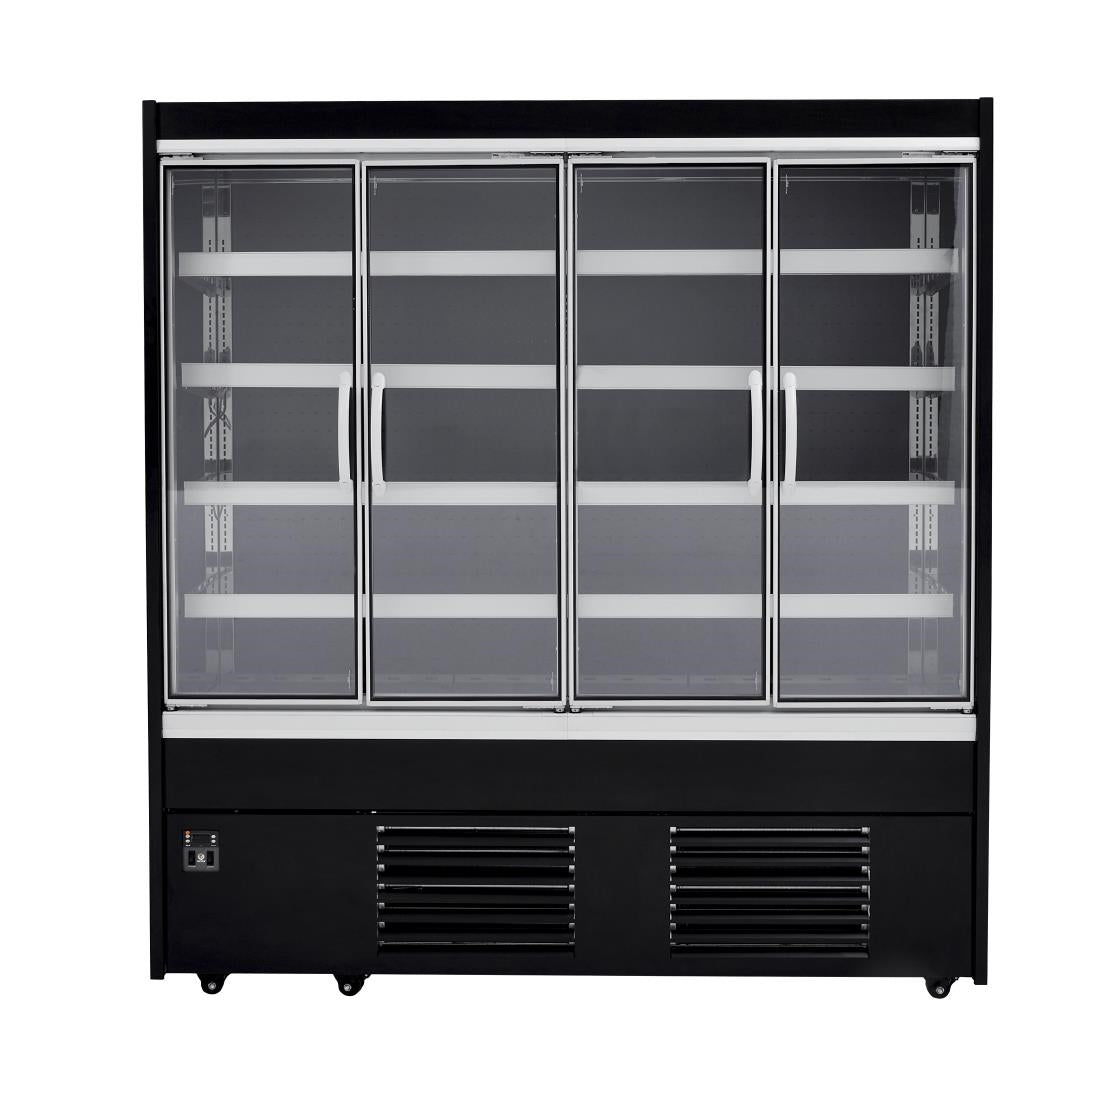 DP593 Victor Maxiline 1800mm Standard Depth Multideck With Doors MAXI180-VD-MT-G-GY